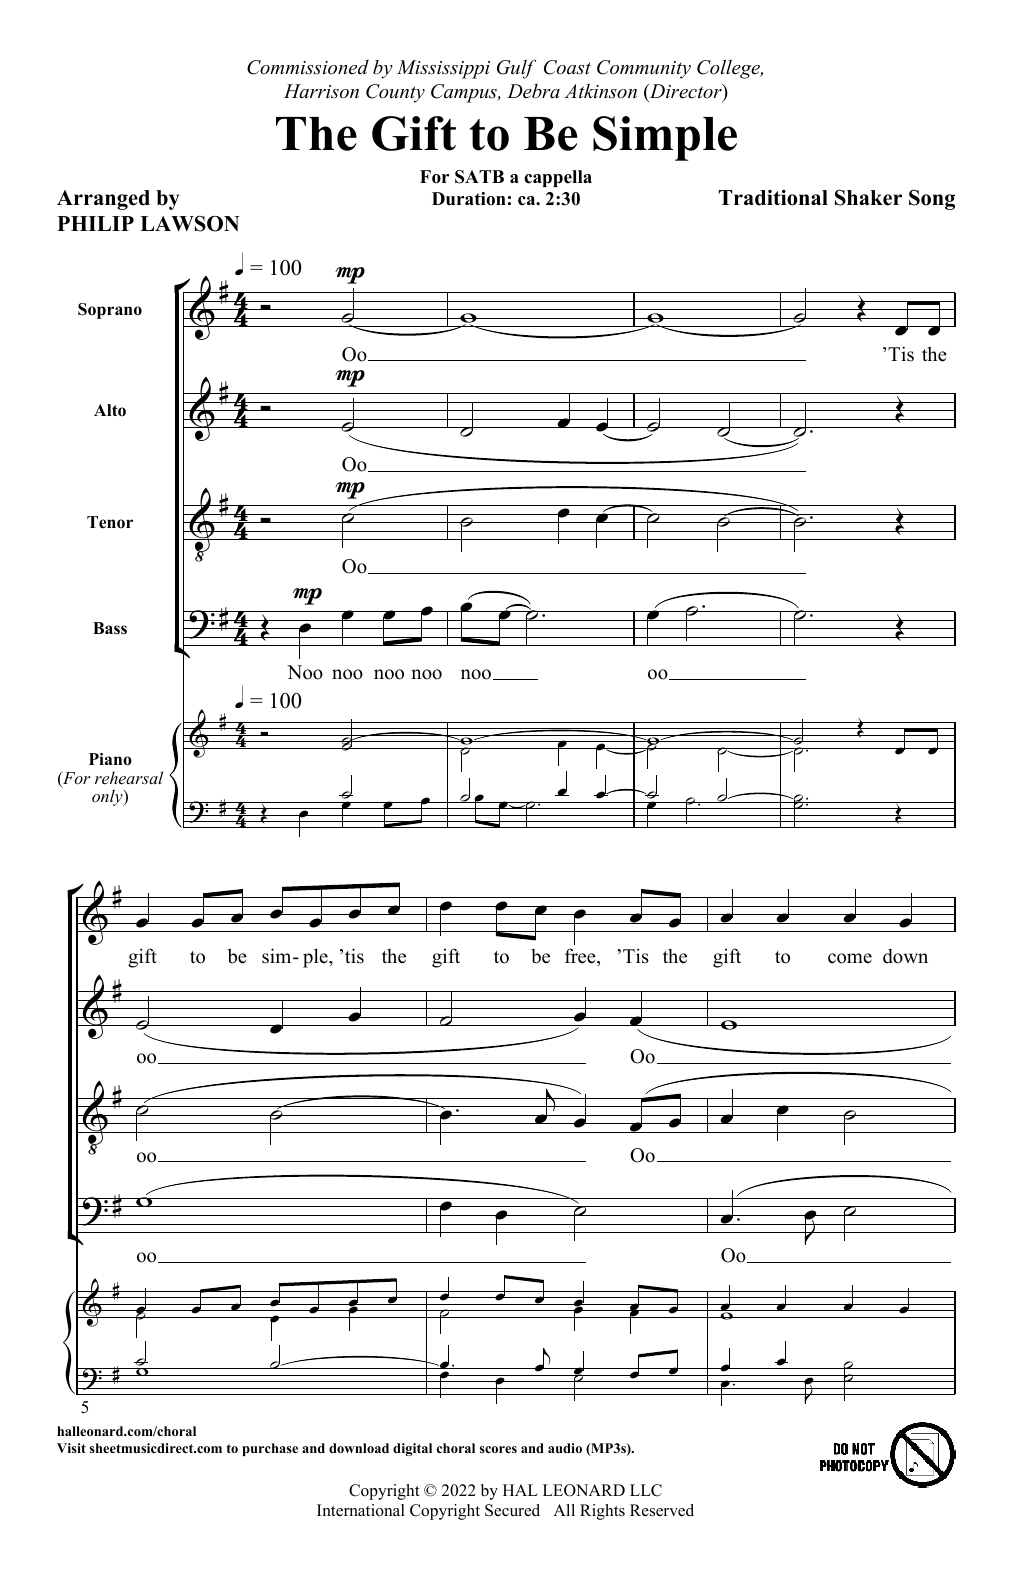 The Gift To Be Simple (arr. Philip Lawson) (SATB Choir) von Traditional Shaker Song